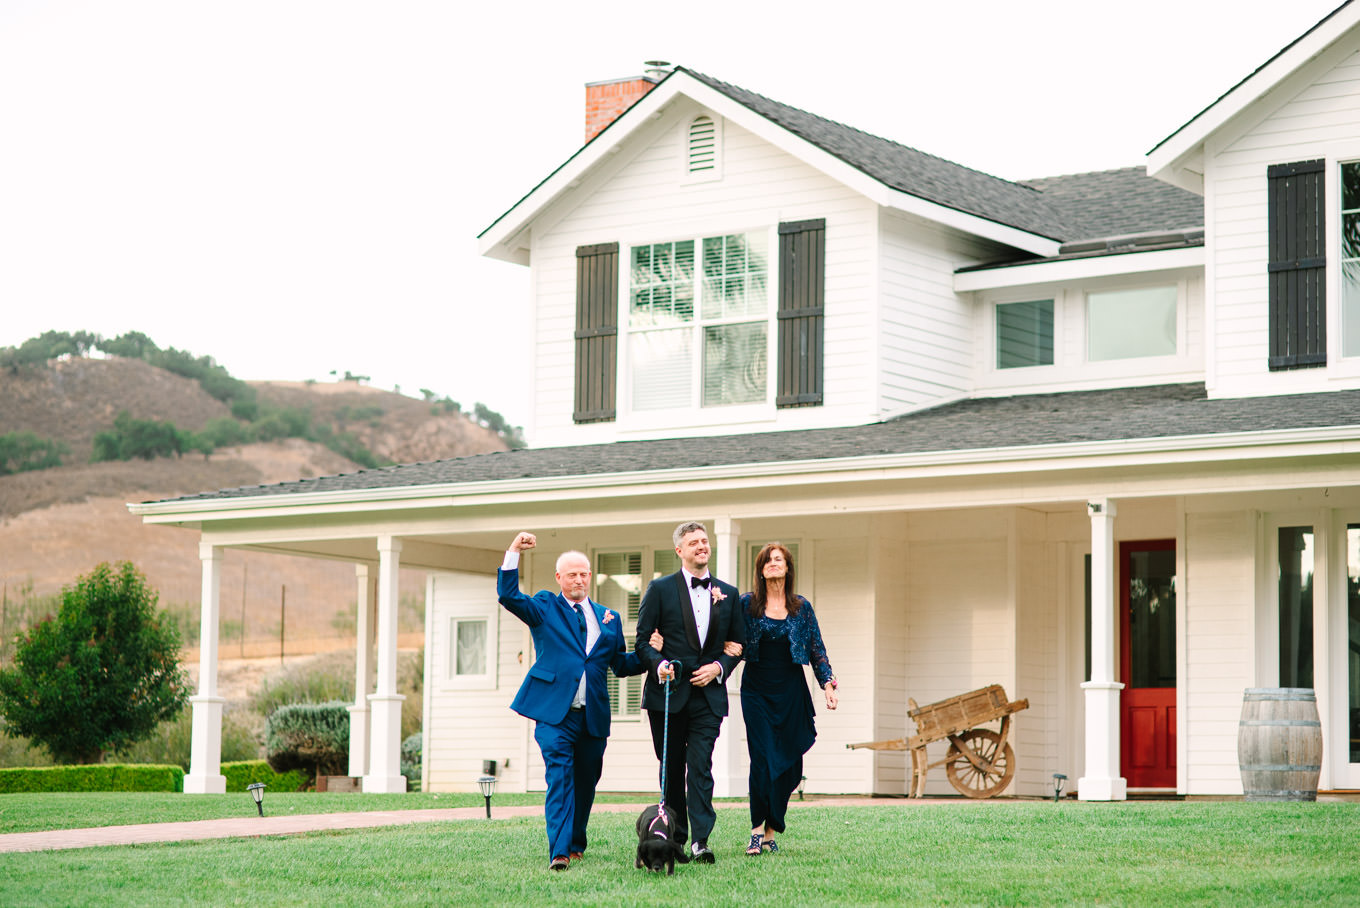 Groom walking with parents at wedding ceremony | Colorful and quirky wedding at Higuera Ranch in San Luis Obispo | #sanluisobispowedding #californiawedding #higueraranch #madonnainn   
Source: Mary Costa Photography | Los Angeles